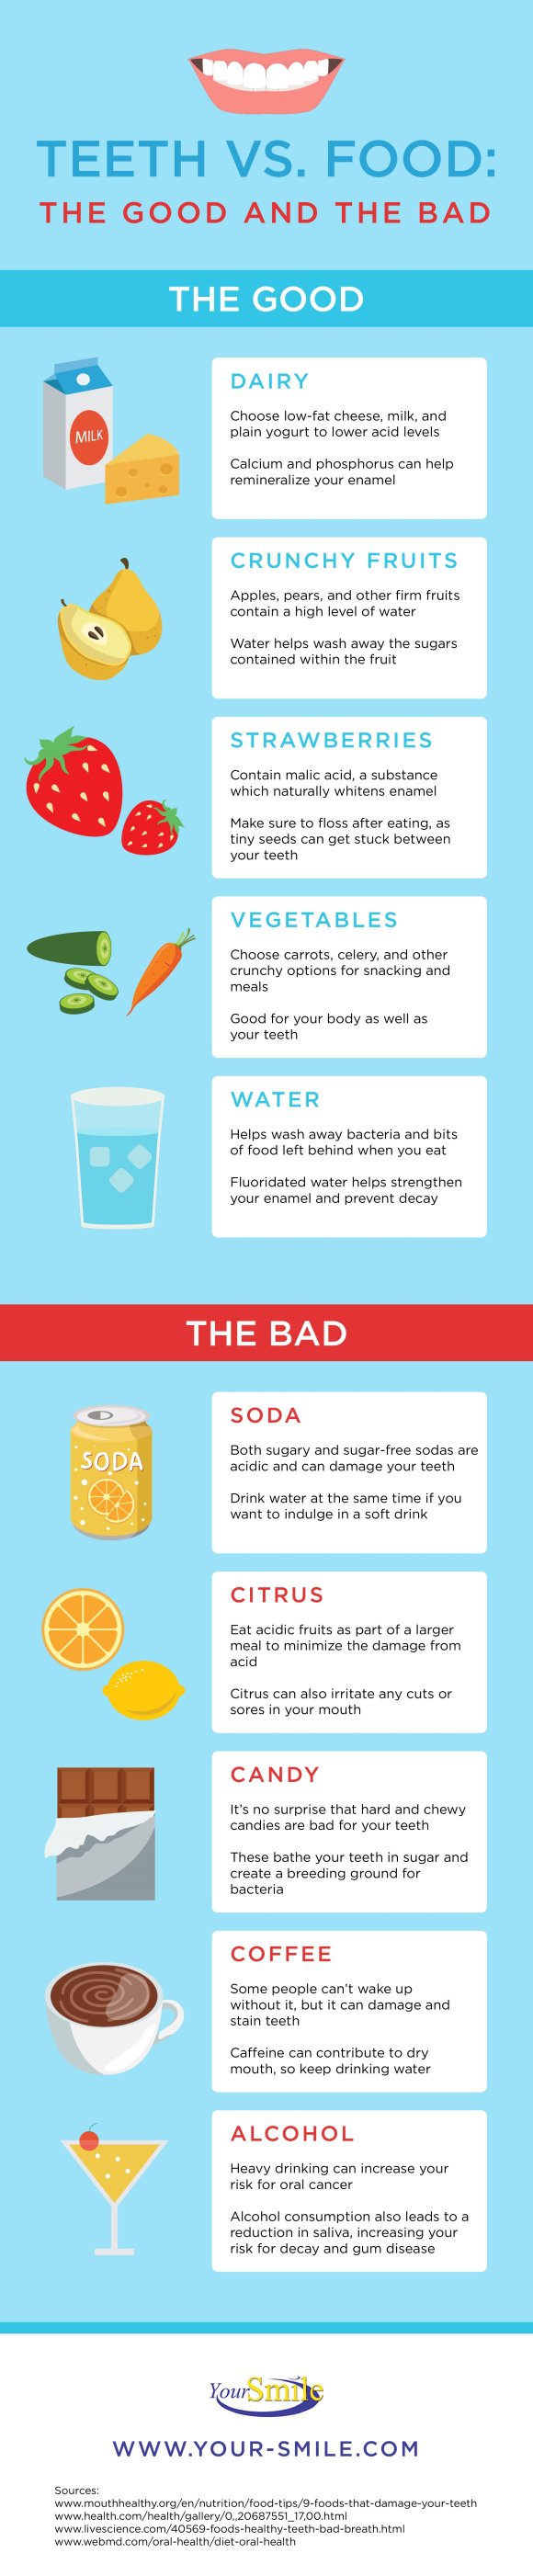 Teeth vs. Food: The Good and the Bad [INFOGRAPHIC]